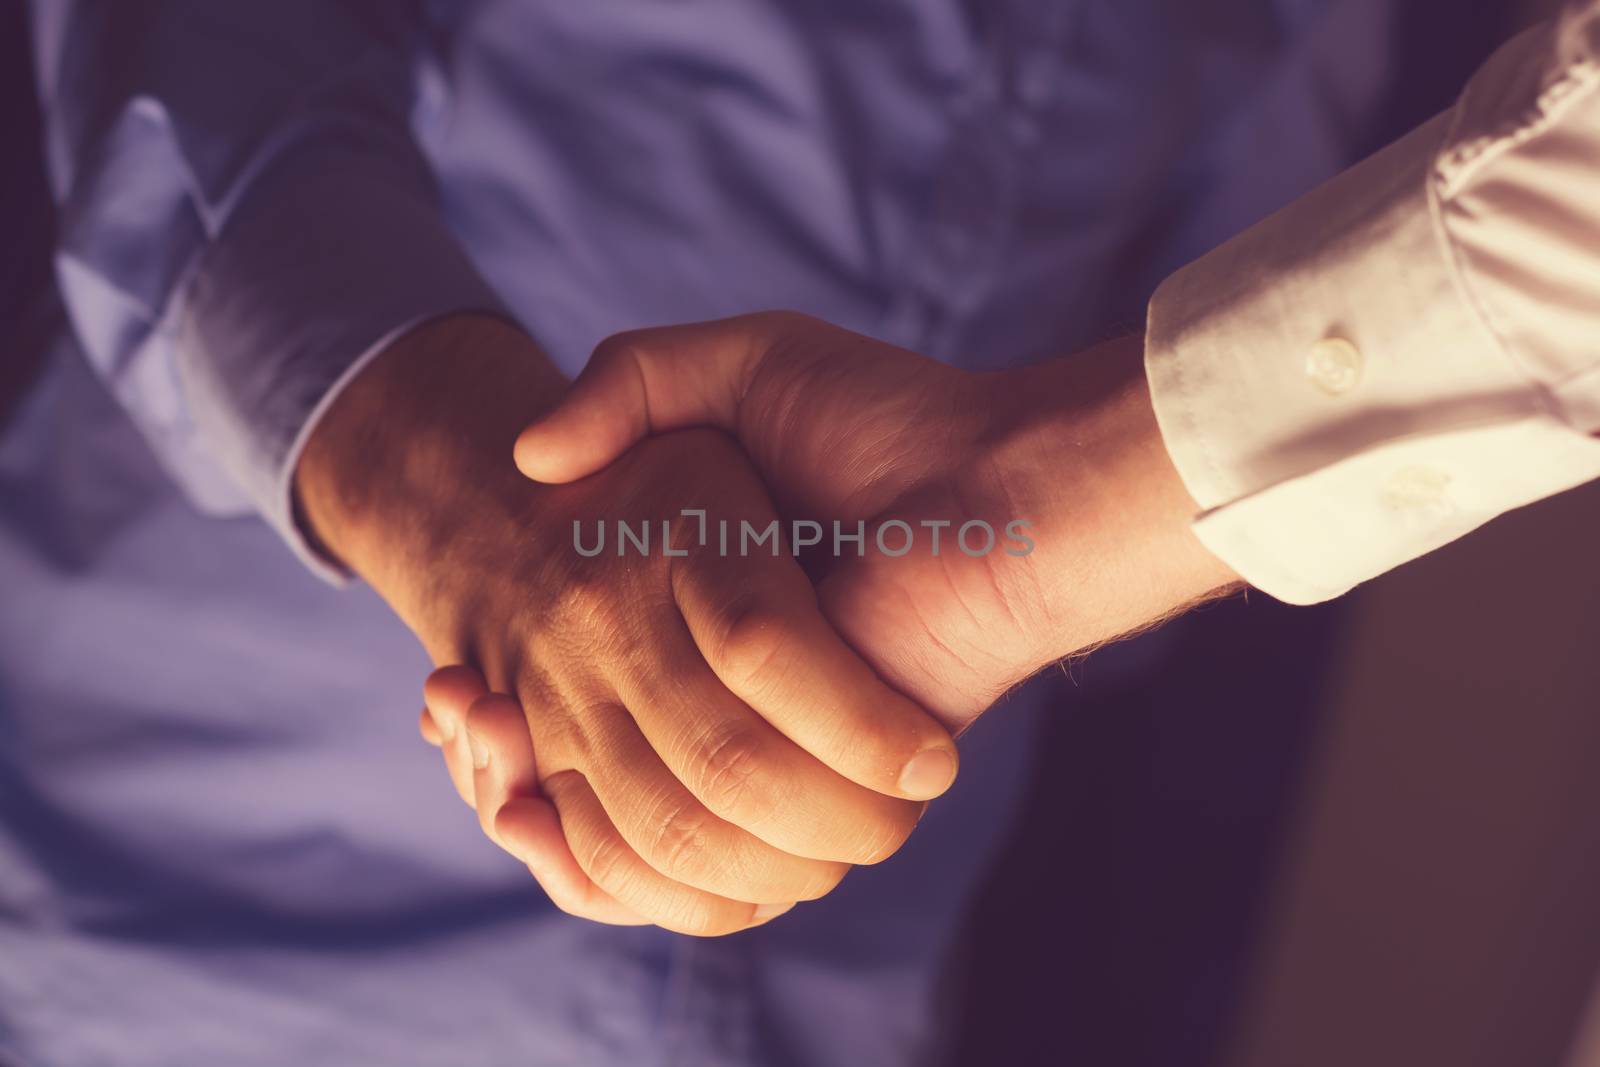 Handshaking of two business people. Partnership - Teamwork. Greeting, Form Of Communication. Light in scene come from down. 